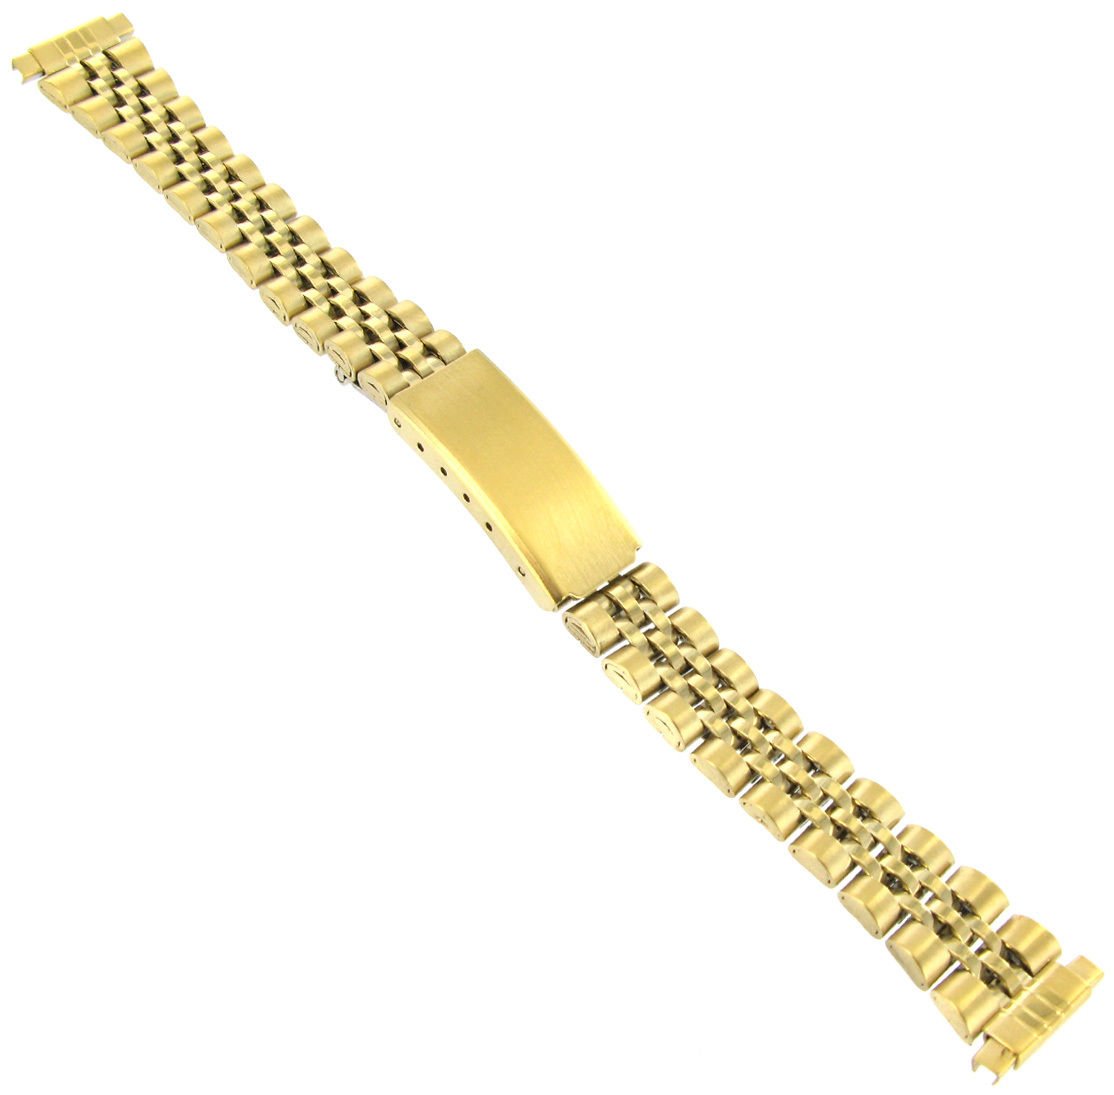 10-14mm Speidel Express Gold Tone Buckle Stainless Steel Watch Band 277YR